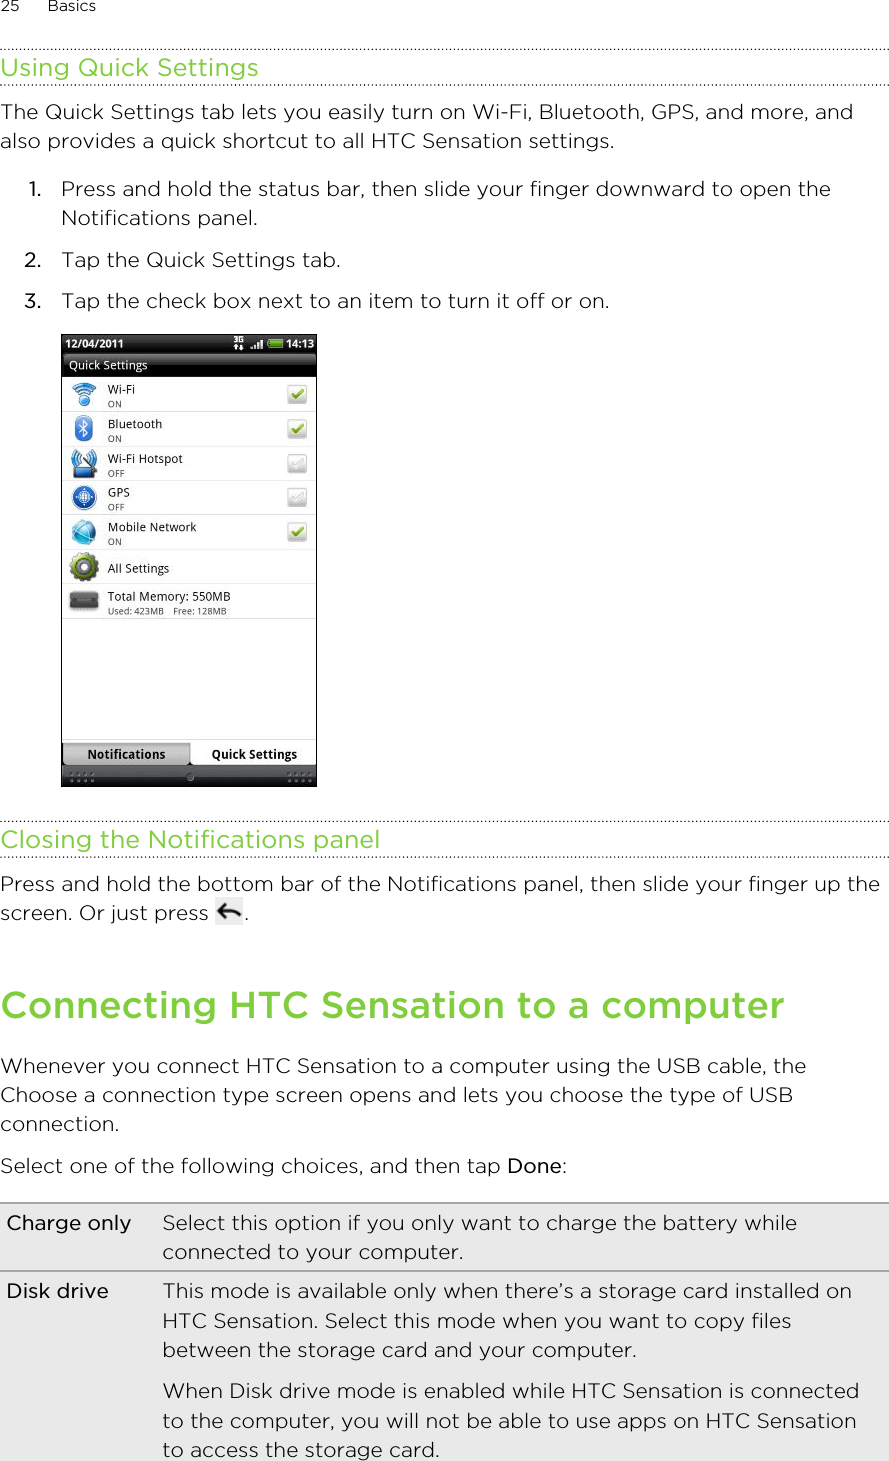 Using Quick SettingsThe Quick Settings tab lets you easily turn on Wi-Fi, Bluetooth, GPS, and more, andalso provides a quick shortcut to all HTC Sensation settings.1. Press and hold the status bar, then slide your finger downward to open theNotifications panel.2. Tap the Quick Settings tab.3. Tap the check box next to an item to turn it off or on. Closing the Notifications panelPress and hold the bottom bar of the Notifications panel, then slide your finger up thescreen. Or just press  .Connecting HTC Sensation to a computerWhenever you connect HTC Sensation to a computer using the USB cable, theChoose a connection type screen opens and lets you choose the type of USBconnection.Select one of the following choices, and then tap Done:Charge only Select this option if you only want to charge the battery whileconnected to your computer.Disk drive This mode is available only when there’s a storage card installed onHTC Sensation. Select this mode when you want to copy filesbetween the storage card and your computer.When Disk drive mode is enabled while HTC Sensation is connectedto the computer, you will not be able to use apps on HTC Sensationto access the storage card.25 Basics